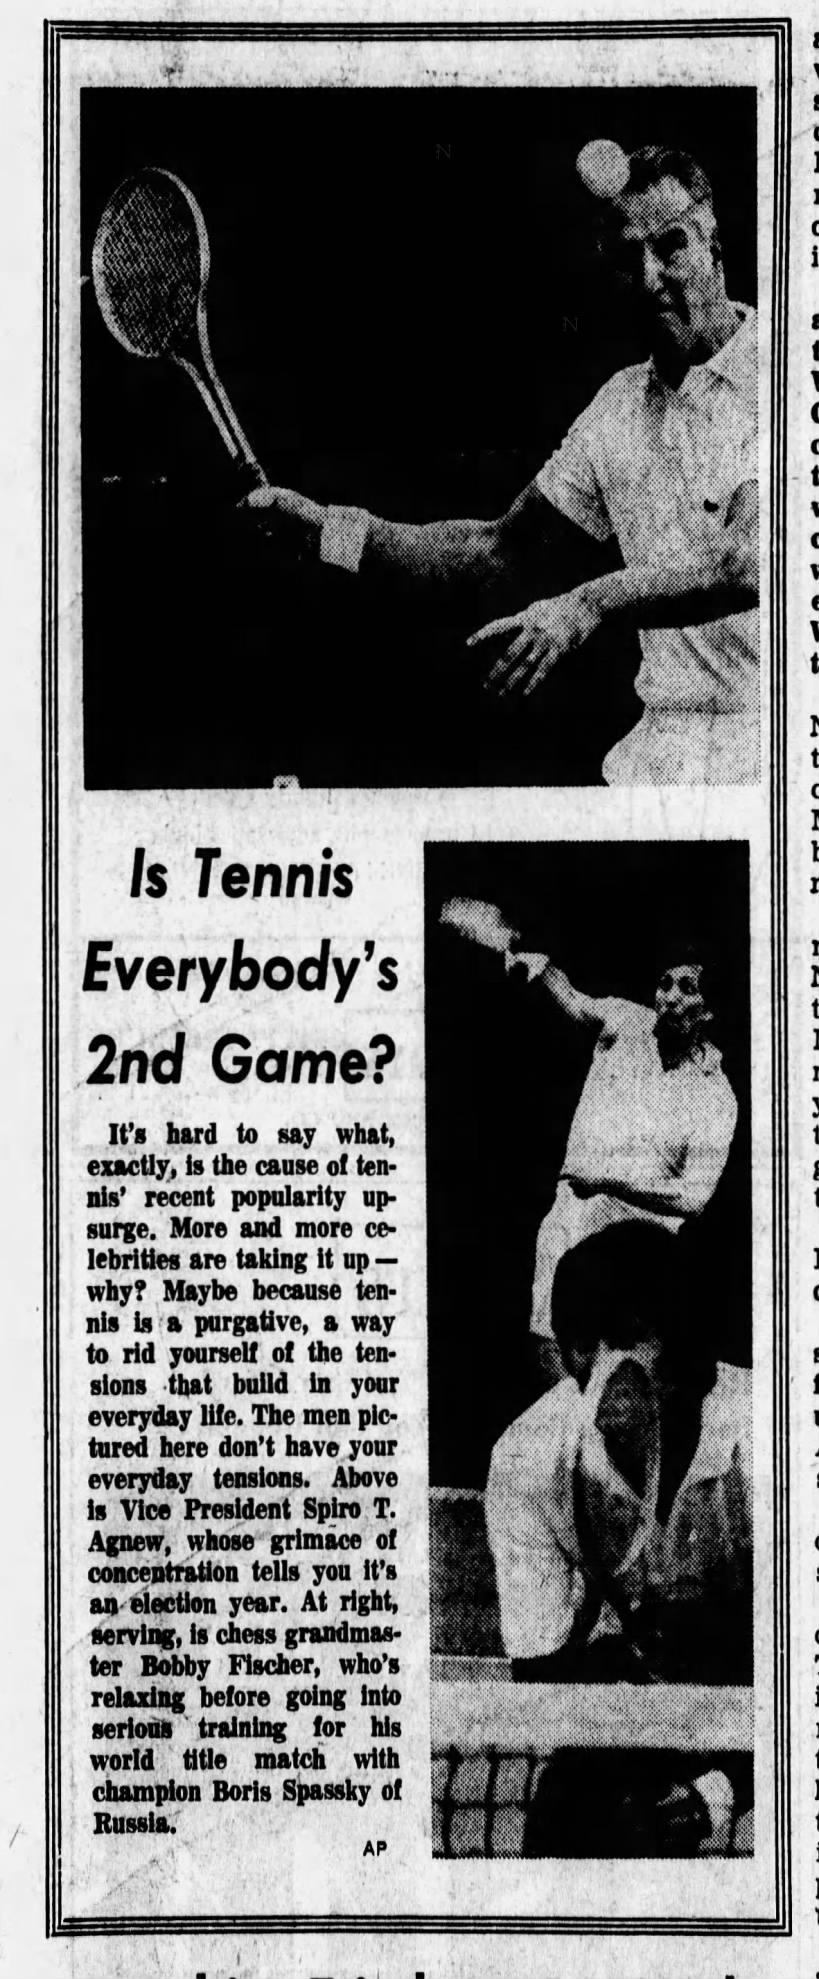 Is Tennis Everybody's 2nd Game?